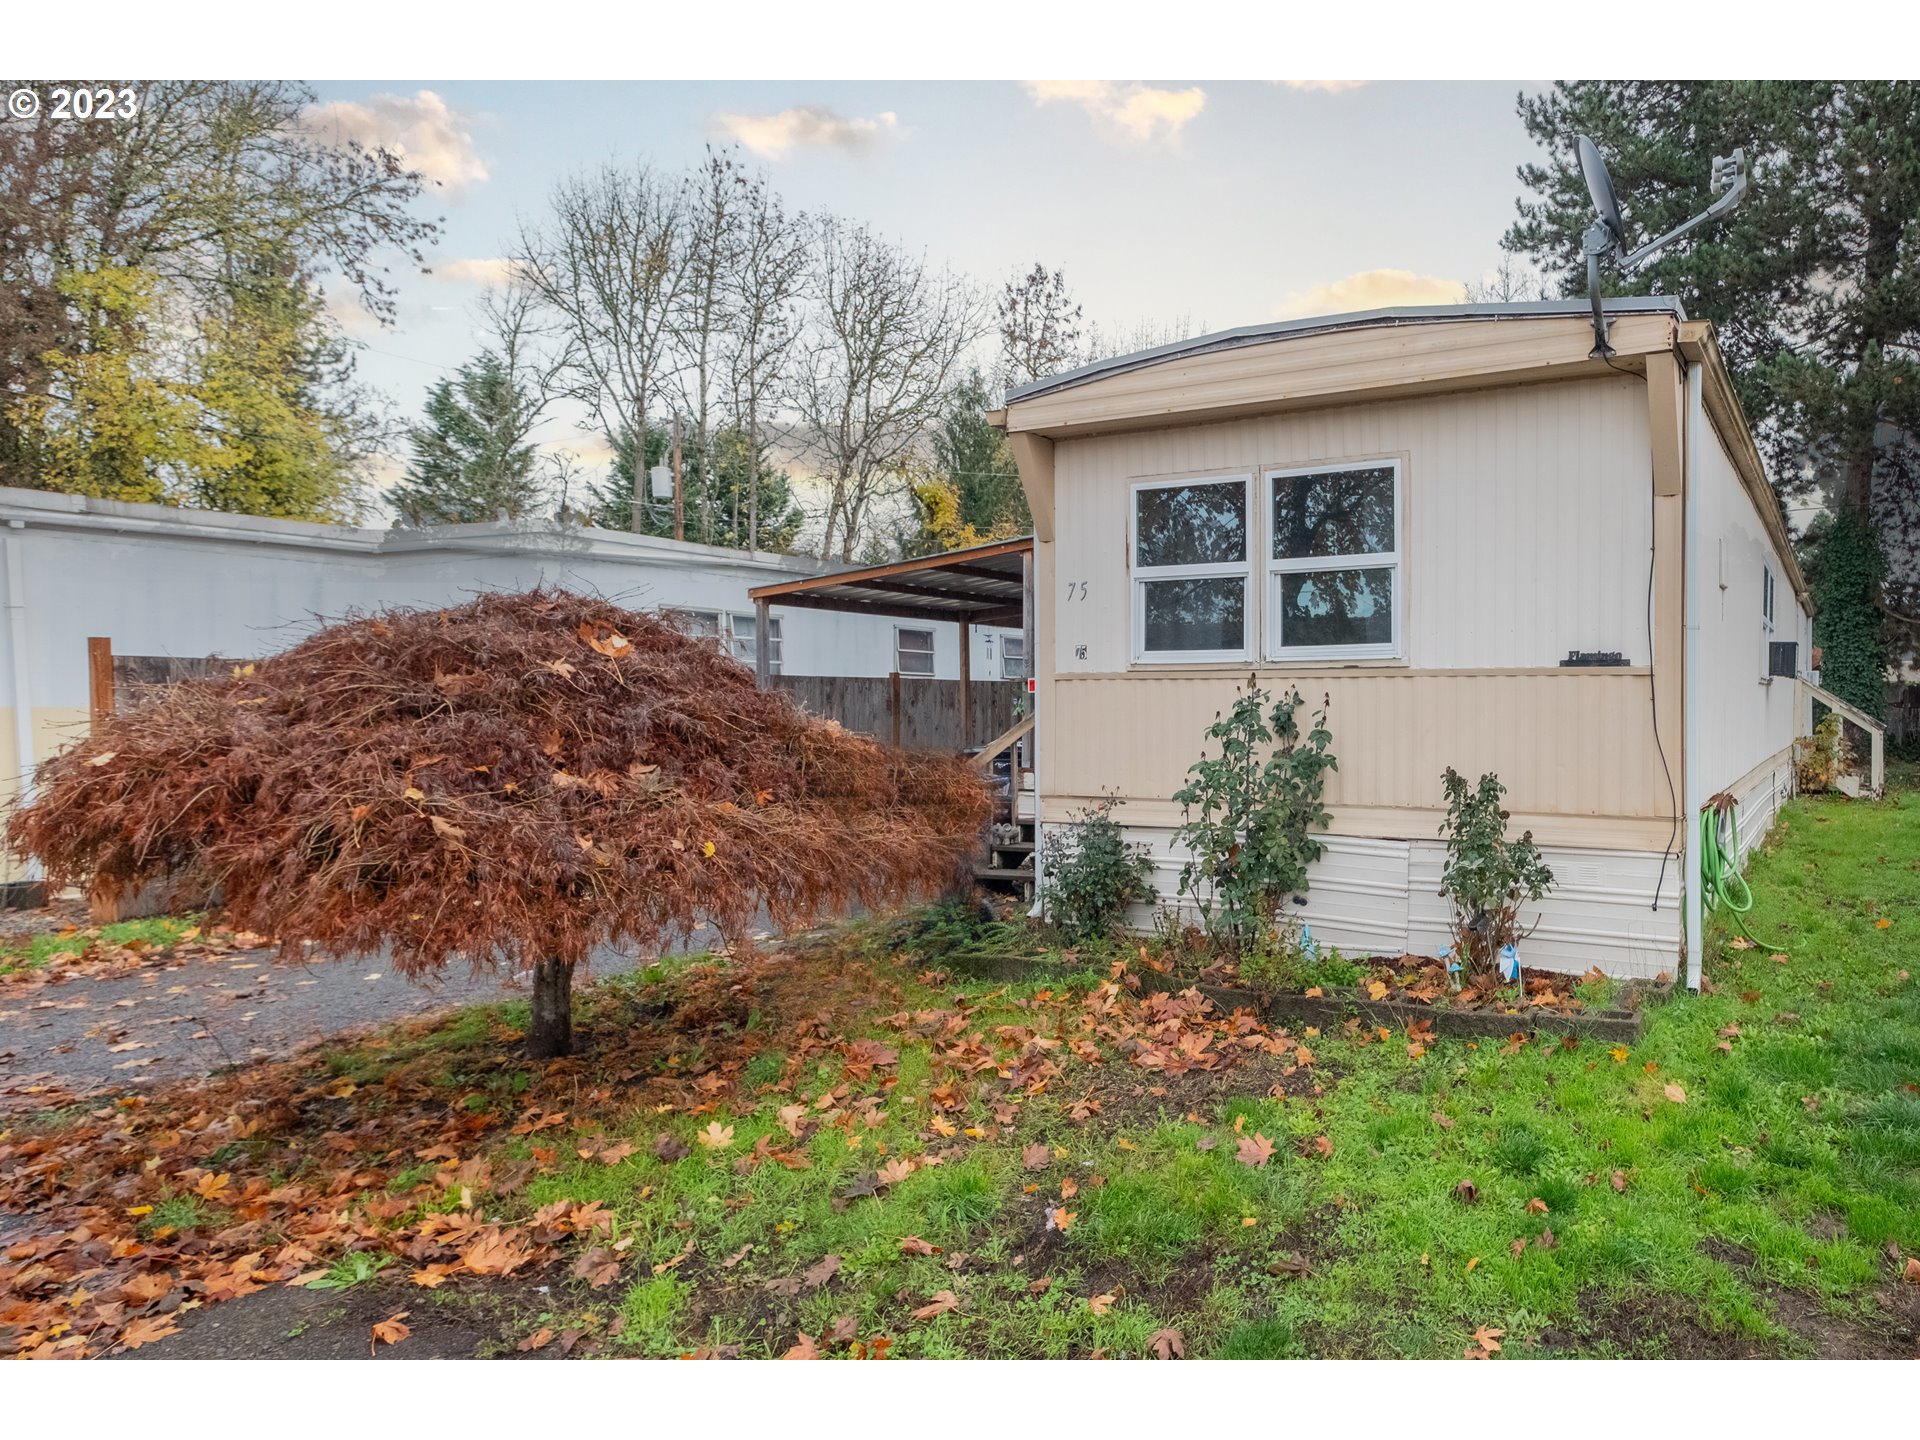 Check out this well maintained 2 bed, 1 bath home in a all age park.  Close to shopping, dining & schools.  Space rent includes water & sewer.  Don't wait.  Come make this your home.